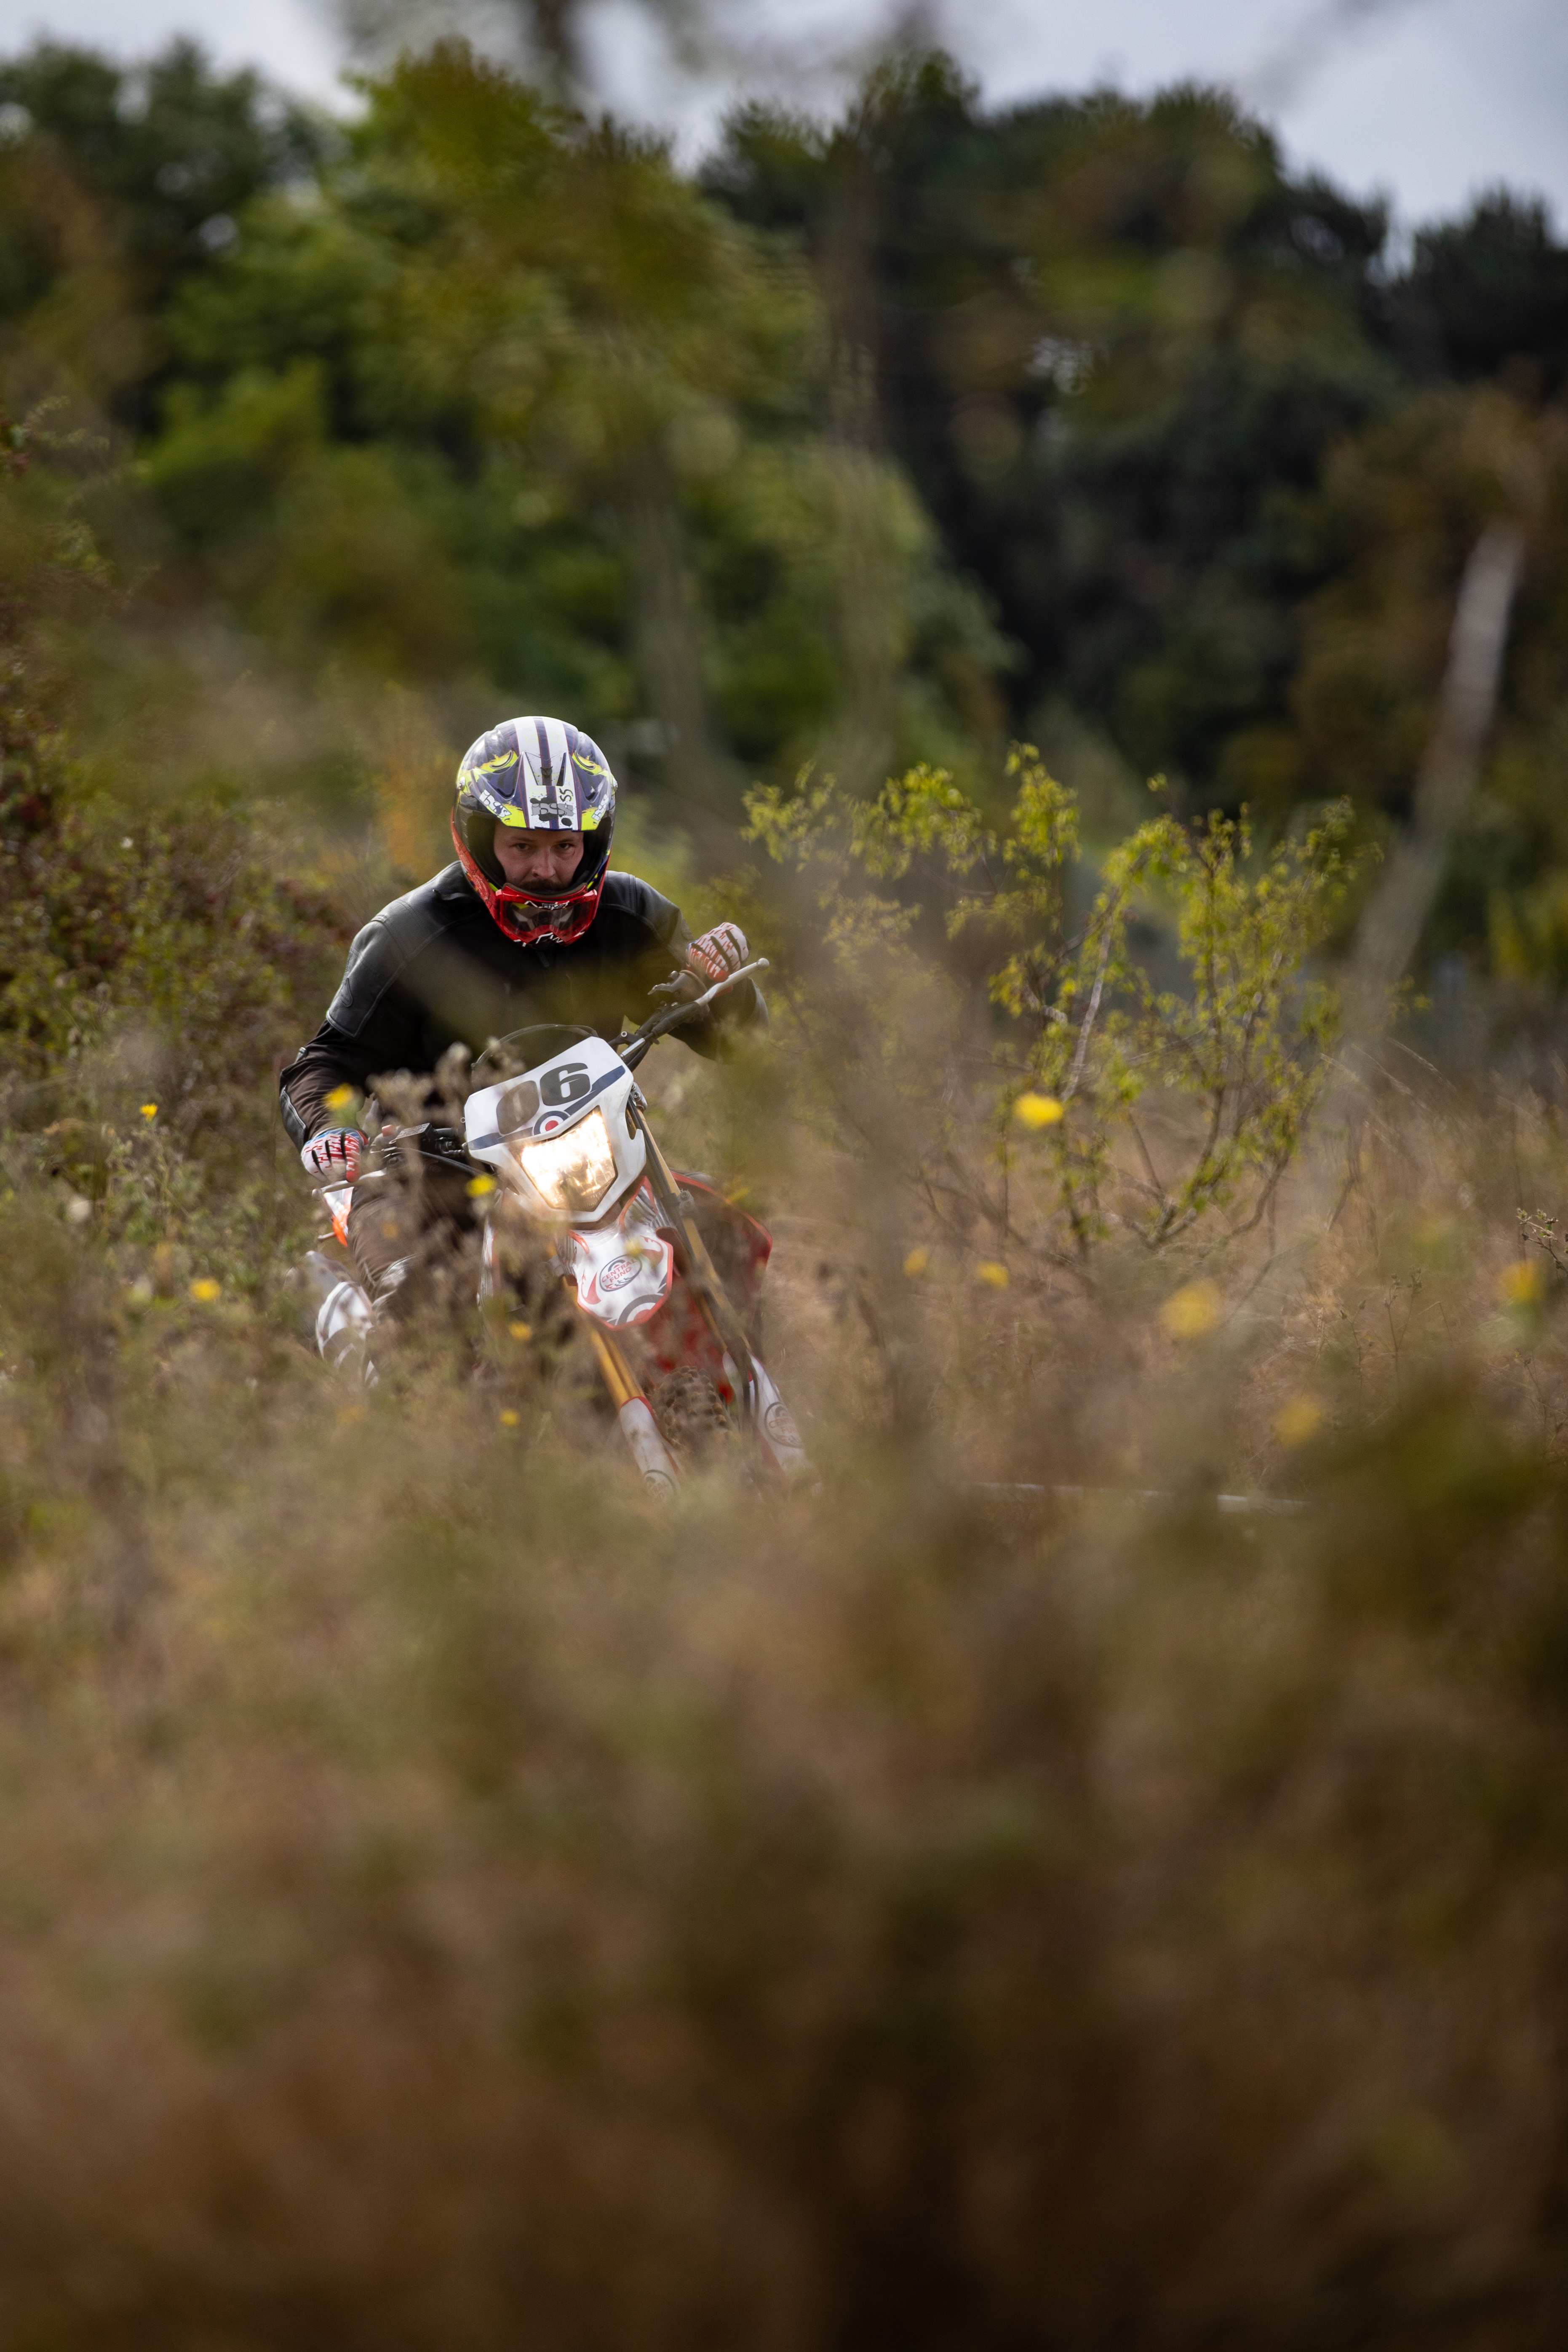 Enduro motorcycling was one of the sports featured during the day